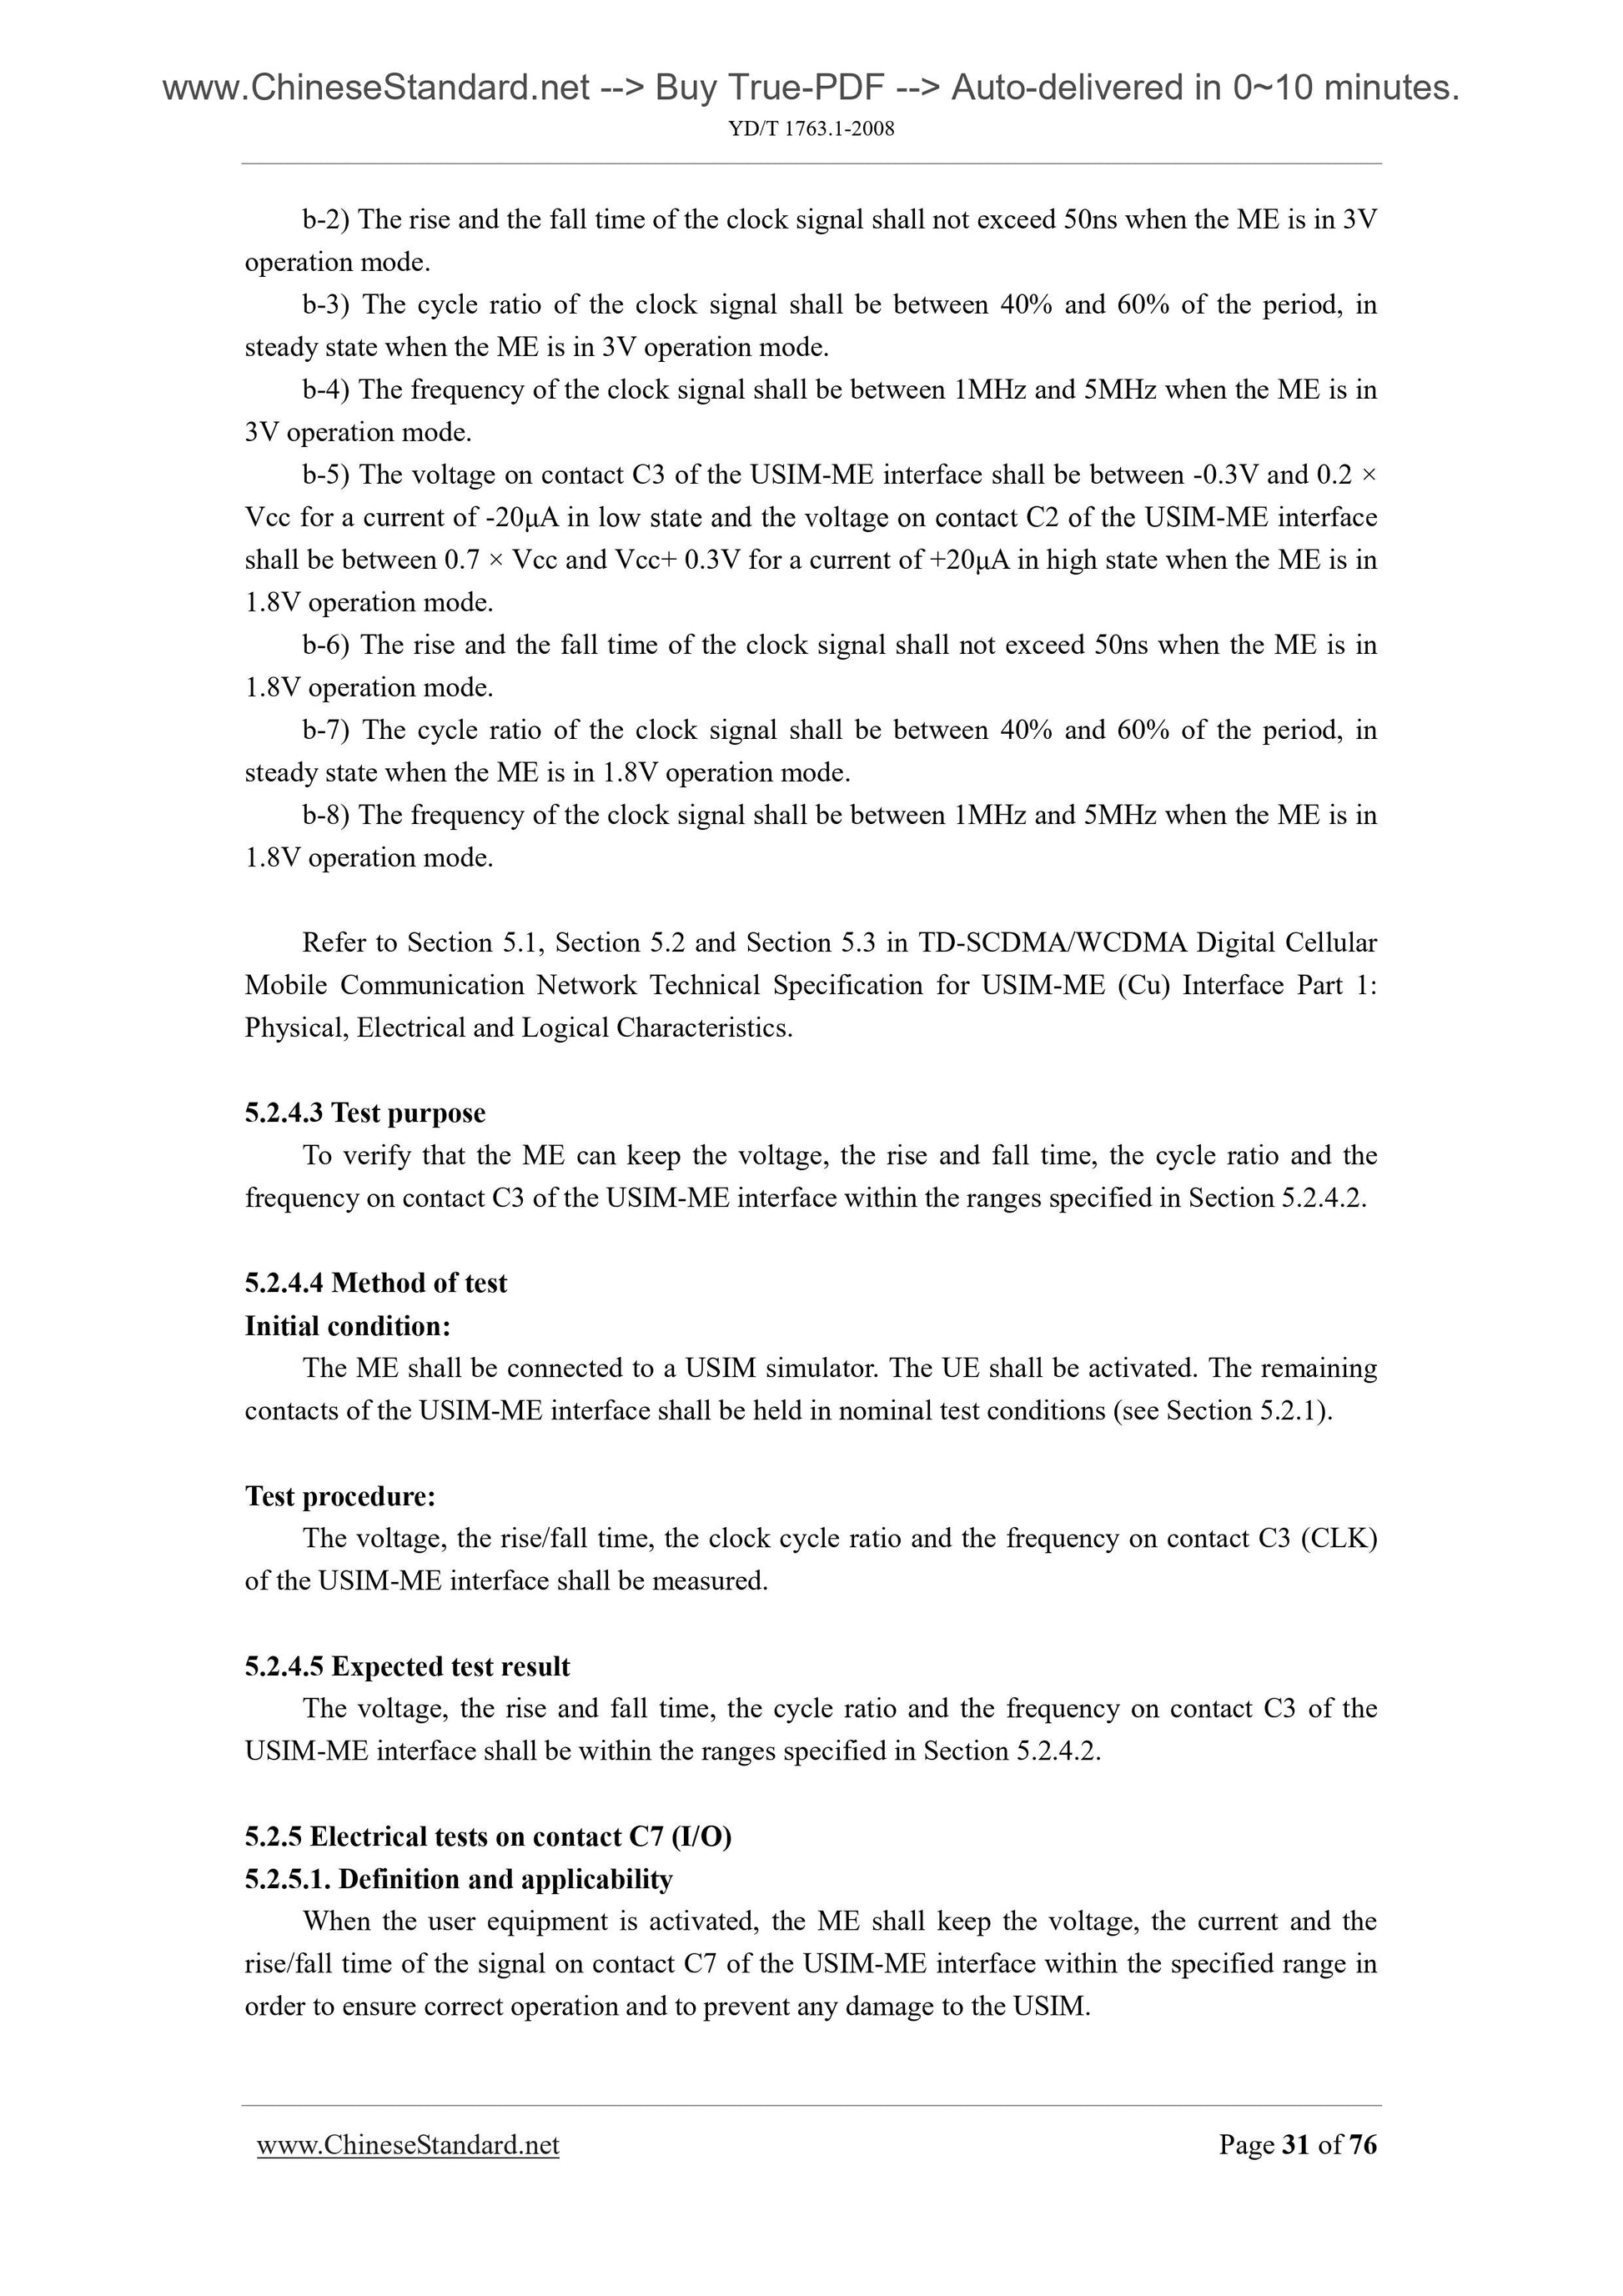 YD/T 1763.1-2008 Page 10